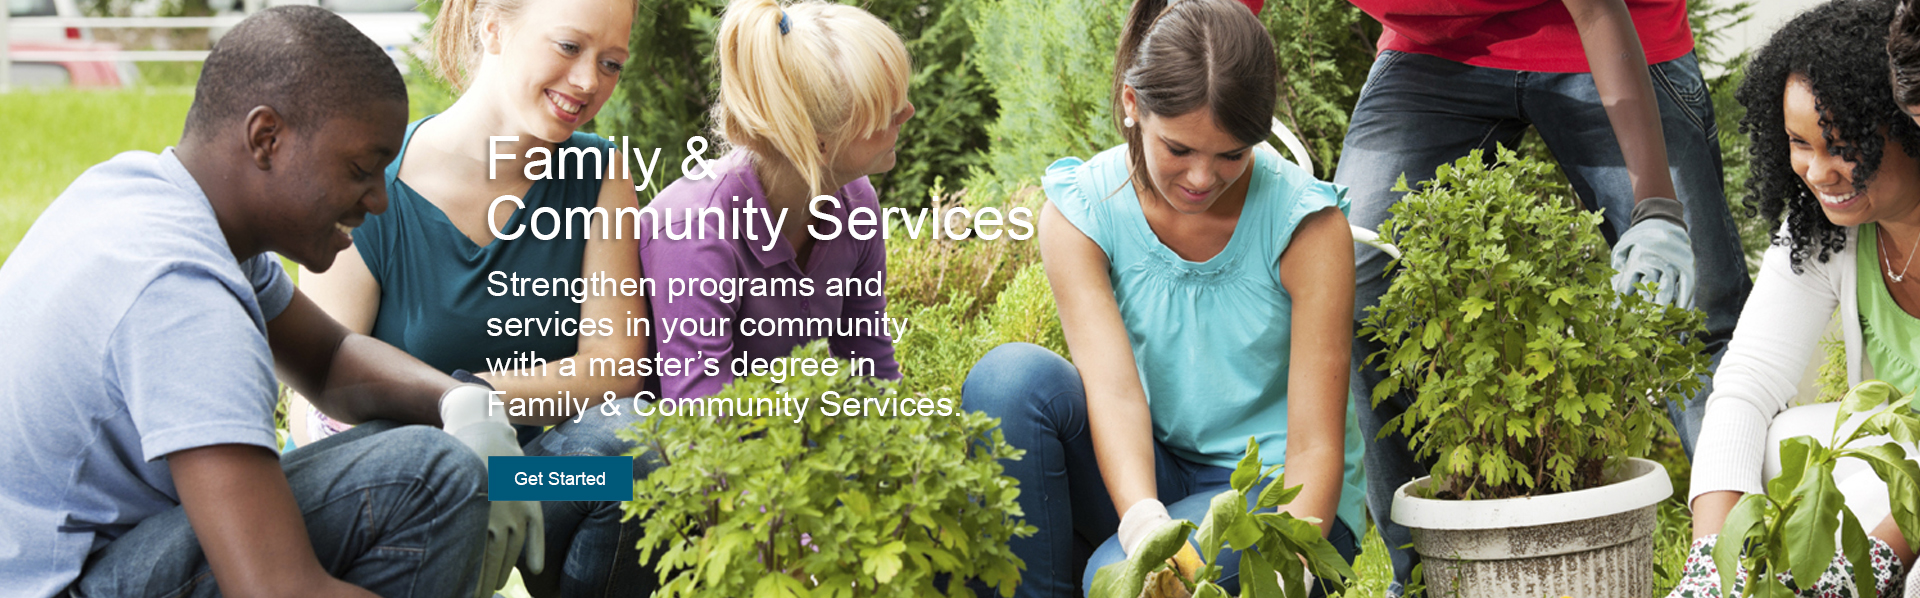 A small group of young people work at a community garden. The Family and Community Services online master's degree helps students strengthen programs and services in their community.